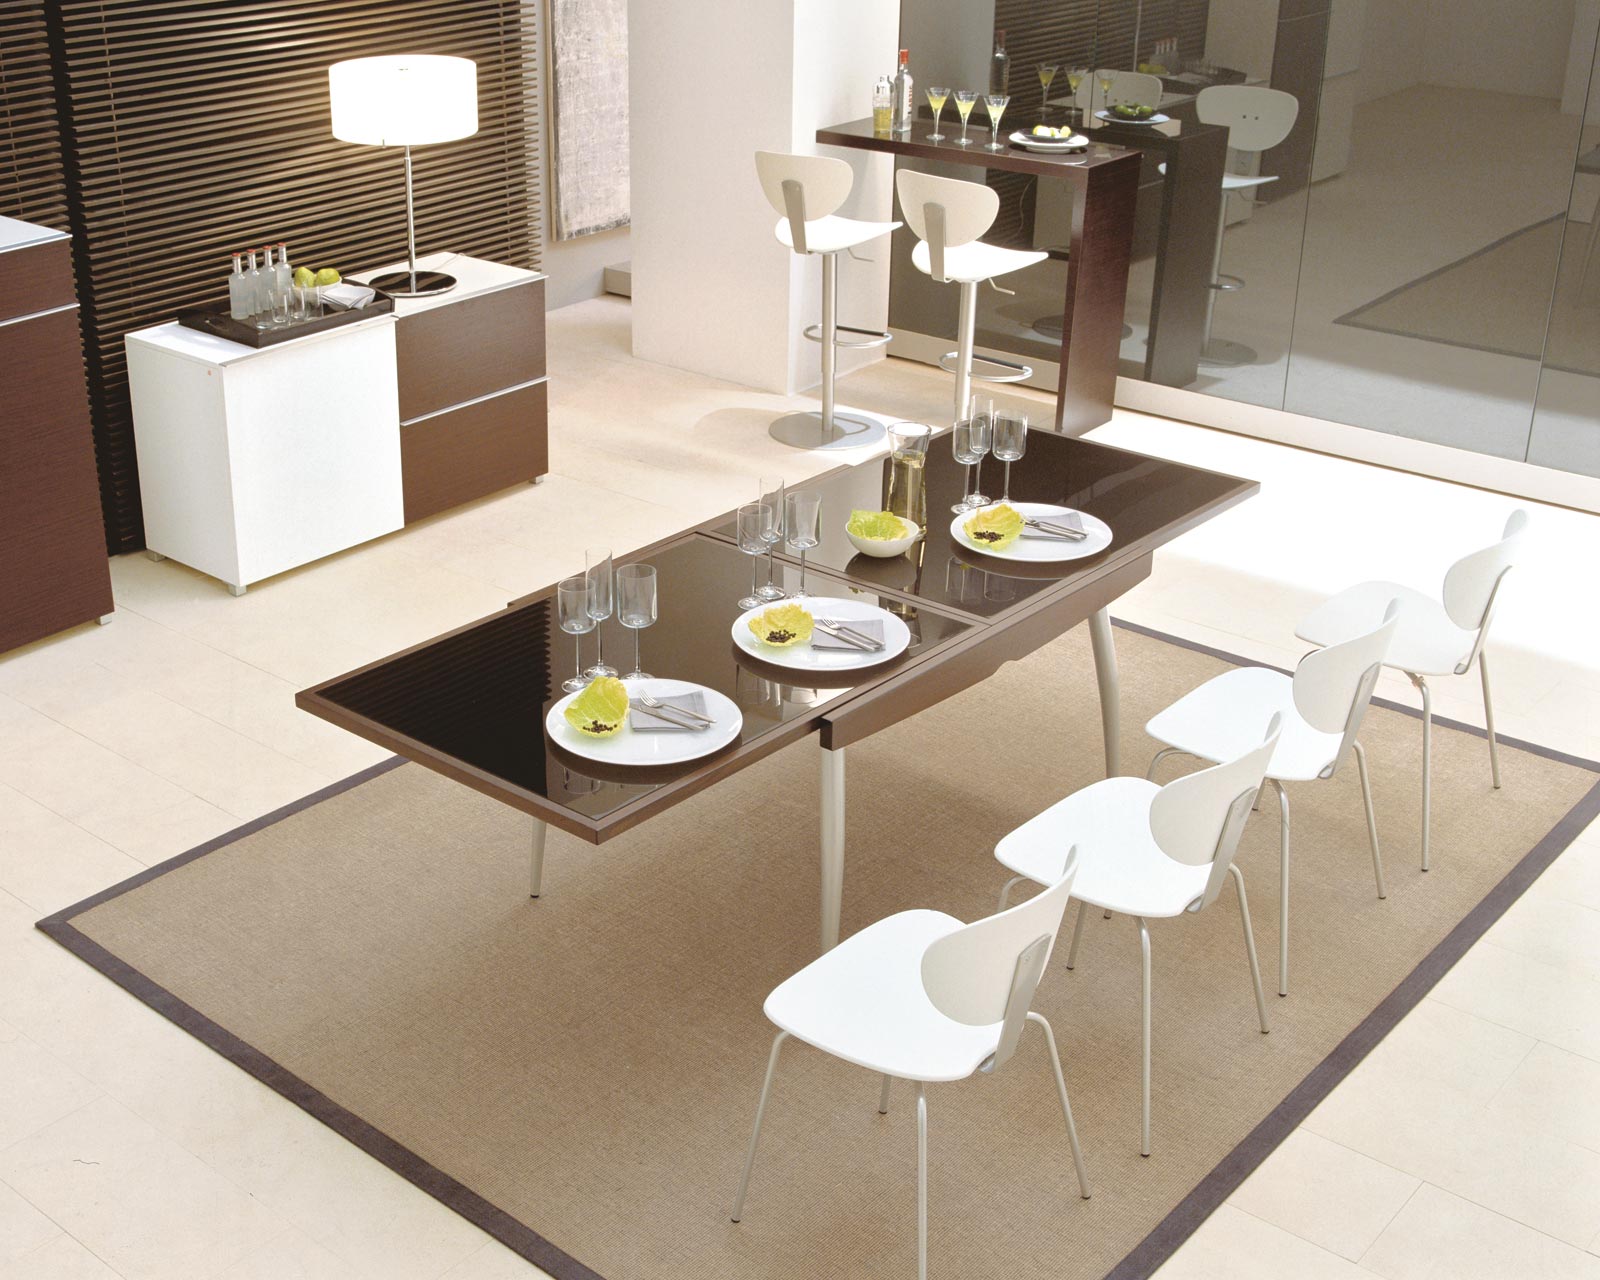 Modern Dining Contemporary Charming Modern Dining Room With Contemporary Dining Room Sets Completed With White Chairs And Elongated Table On Rug And Furnished With Table Lighting On Cupboards Dining Room The Design Contemporary Dining Room Sets